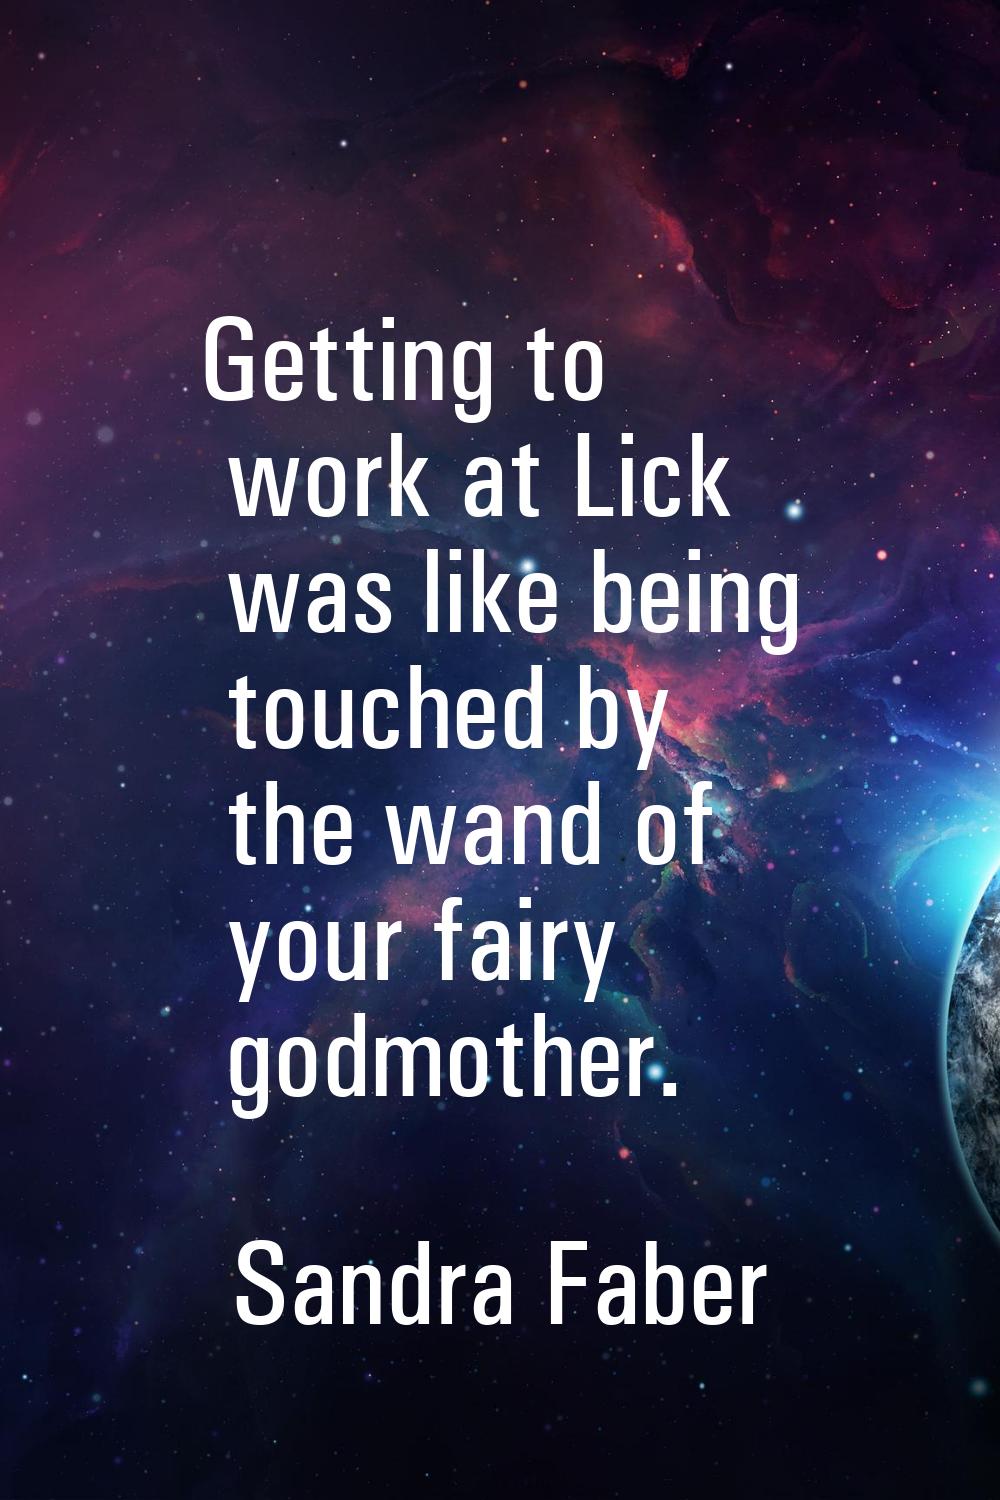 Getting to work at Lick was like being touched by the wand of your fairy godmother.